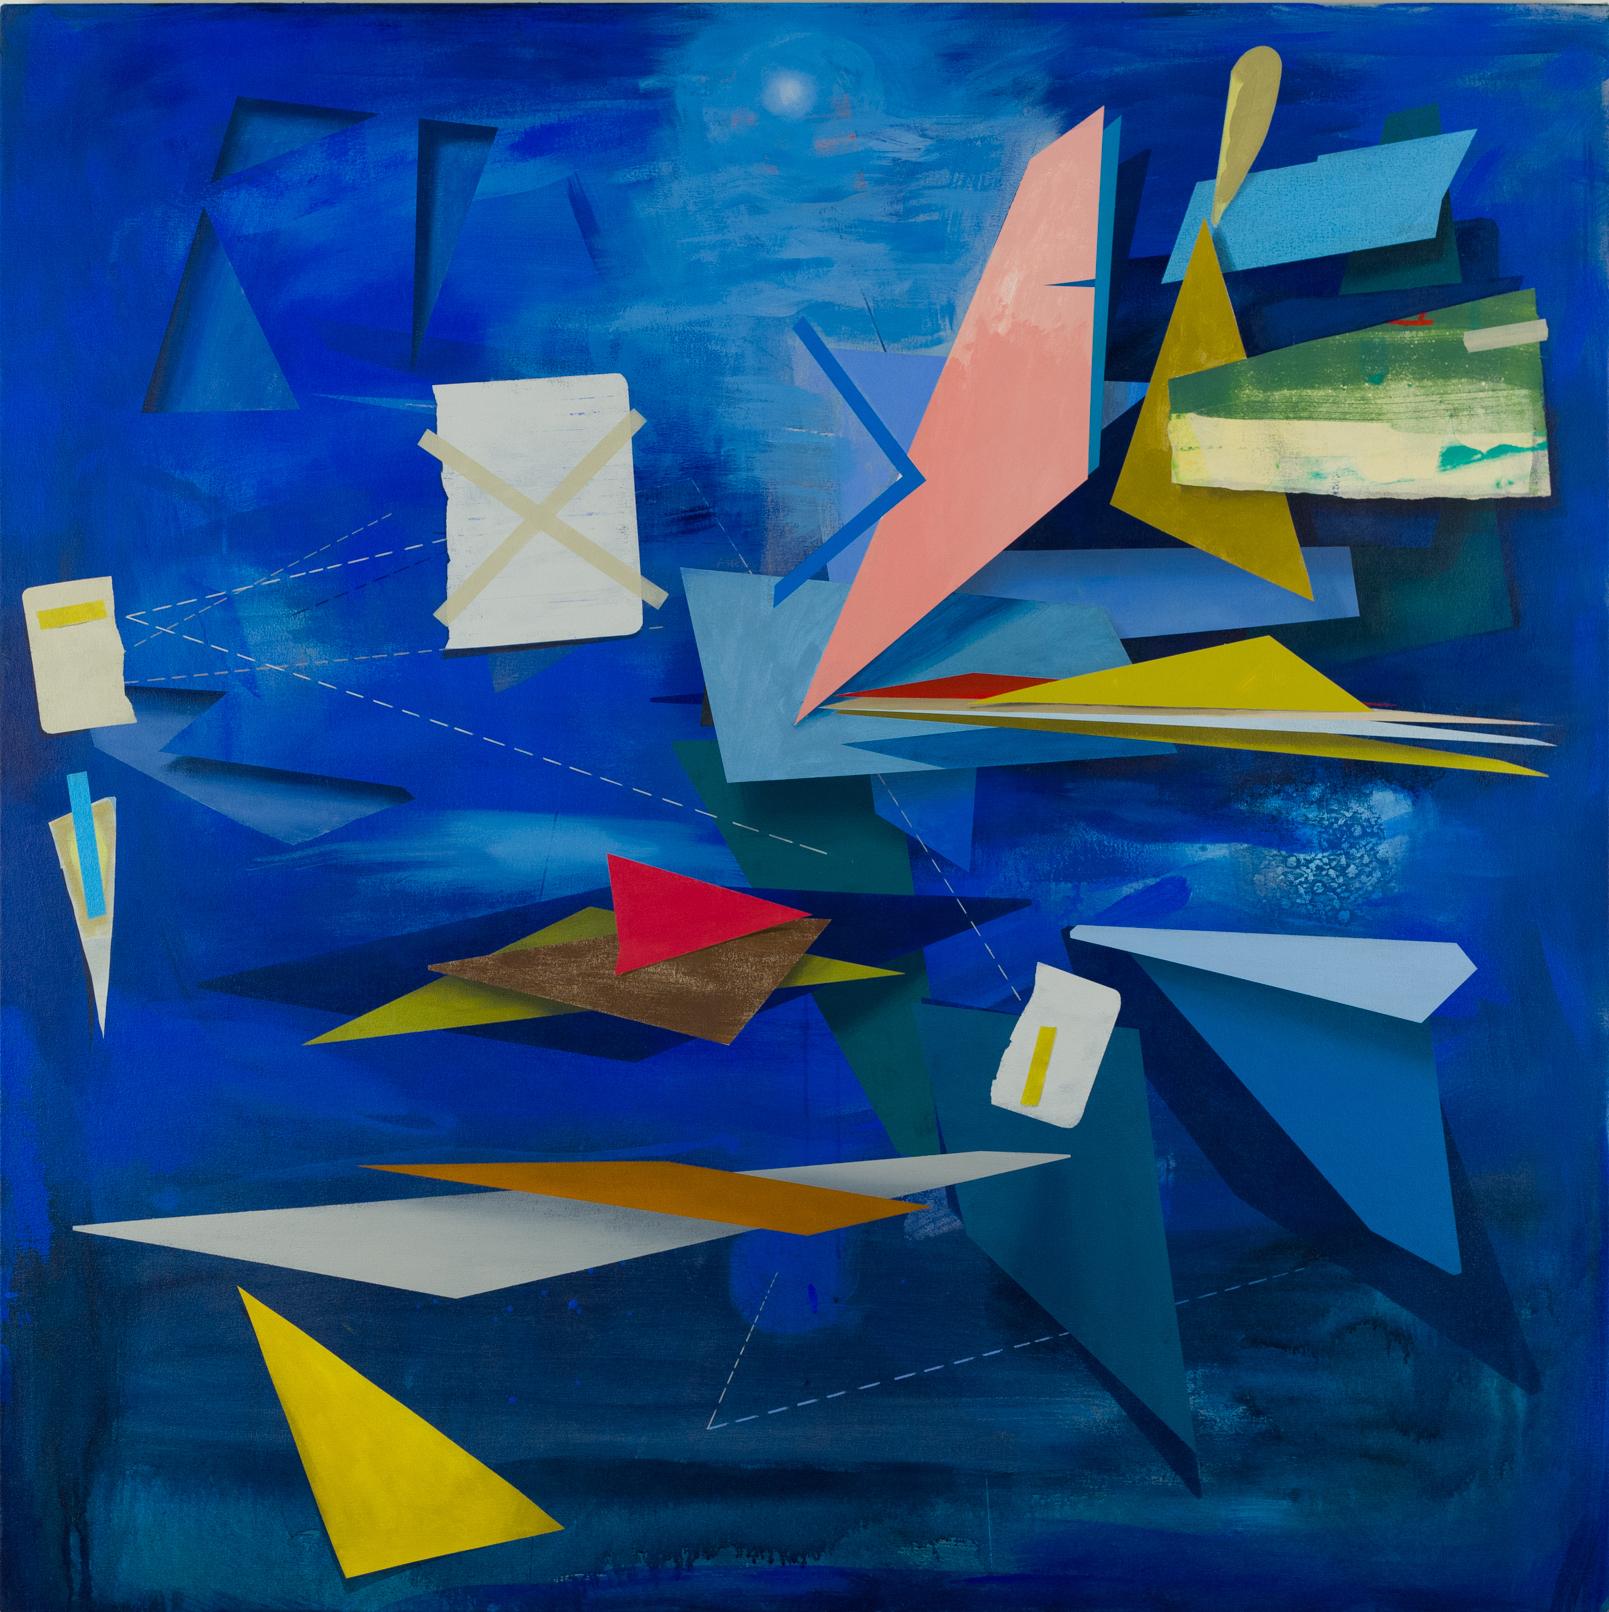 Signalman's Sleep, Large Square Geometric Abstract Painting in Blue, Yellow, Red